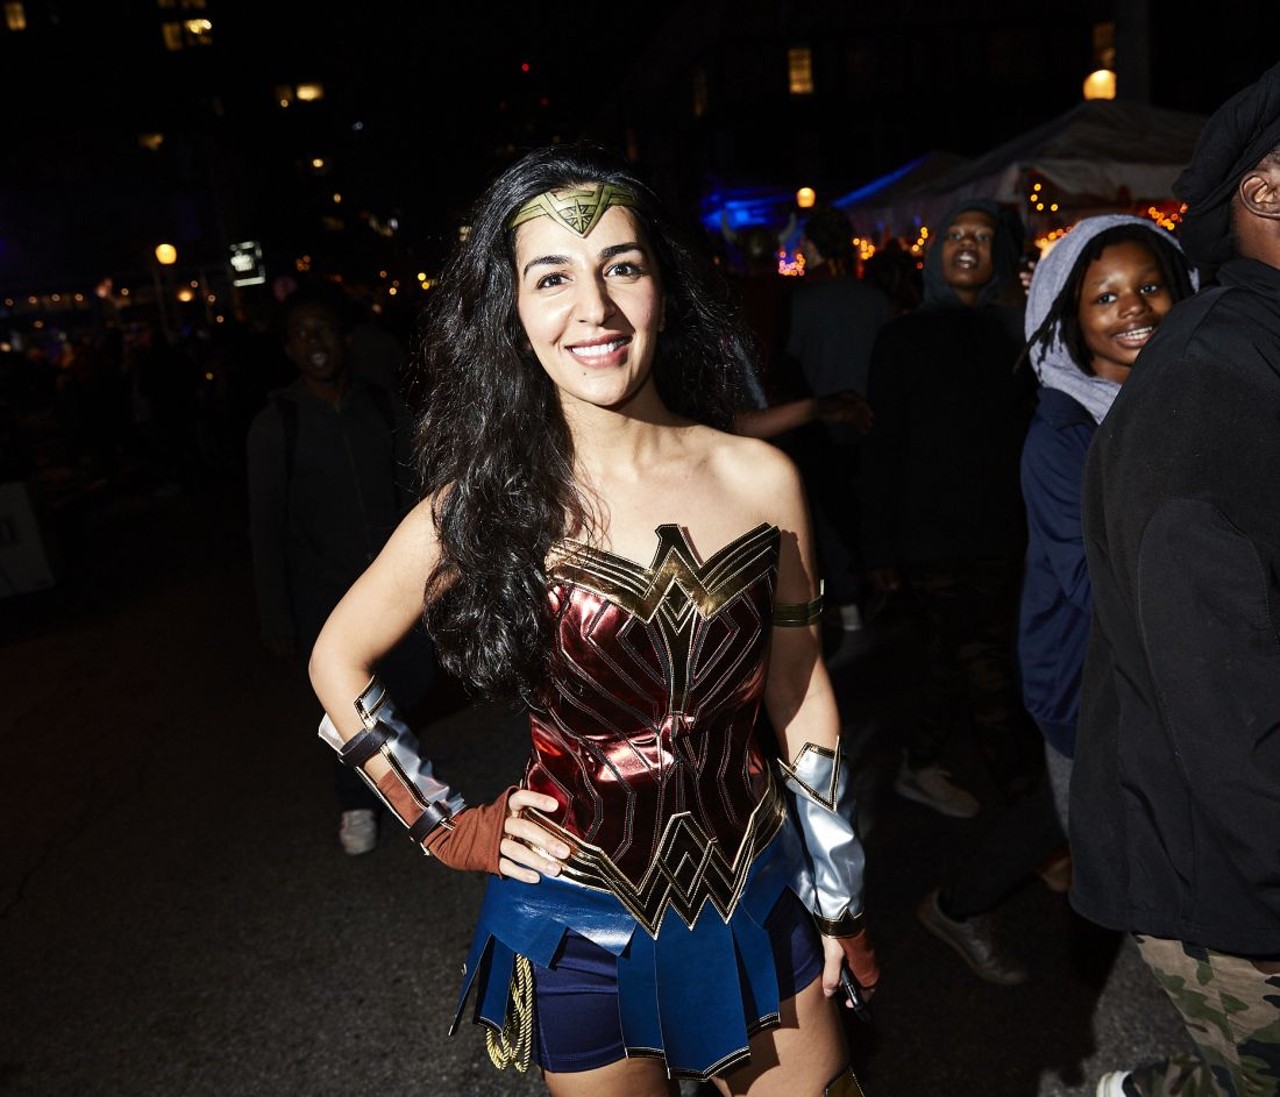 All of the Fabulous People We Saw at the Adults-Only CWE Halloween Street Party